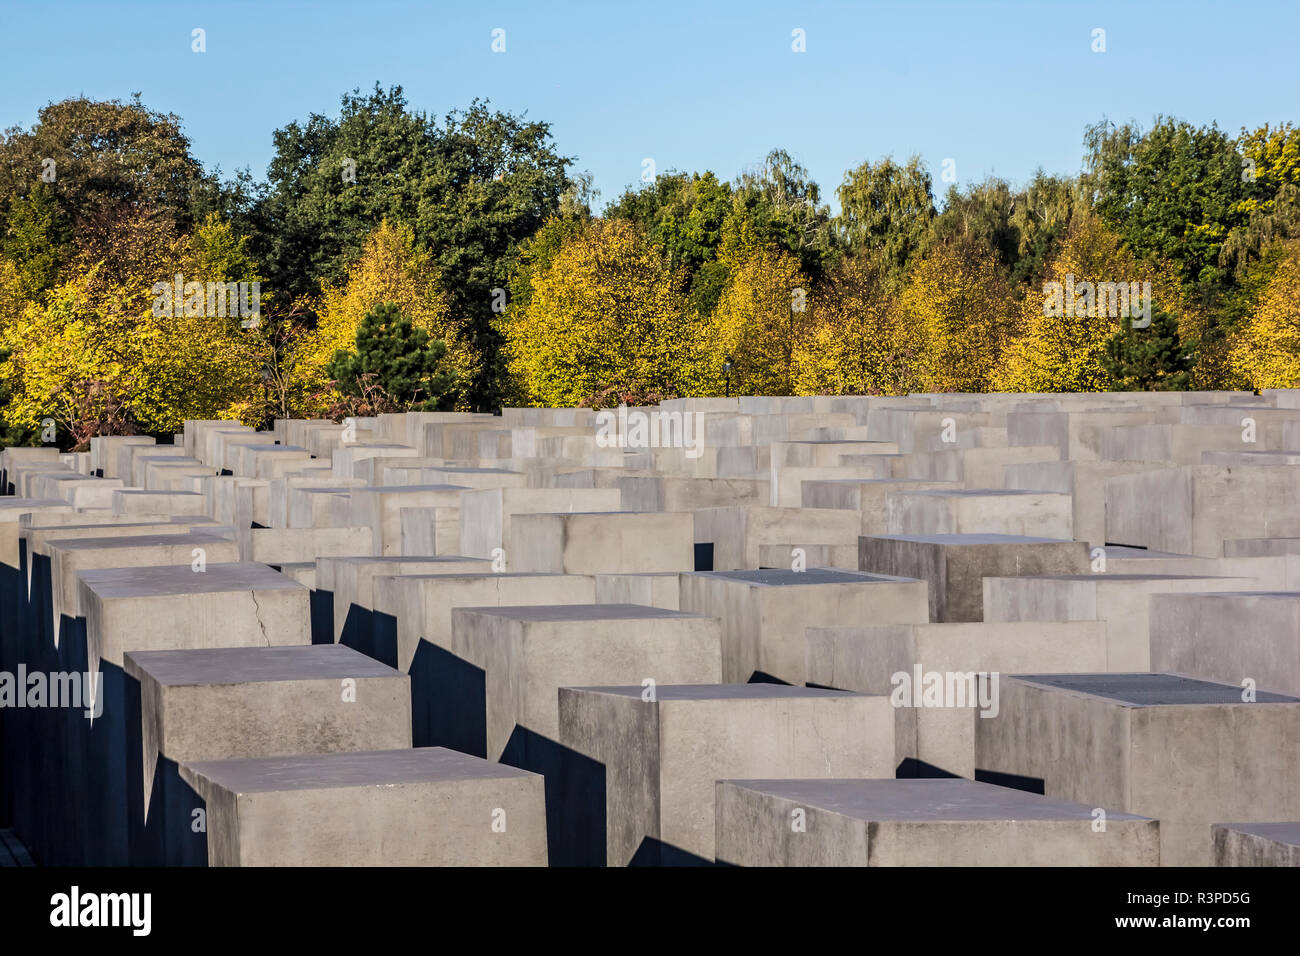 Berlin, Germany. Holocaust Memorial, Memorial to the Murdered Jews of Europe designed by Peter Eisenman near Tiergarten in Mitte (Editorial Use Only) Stock Photo